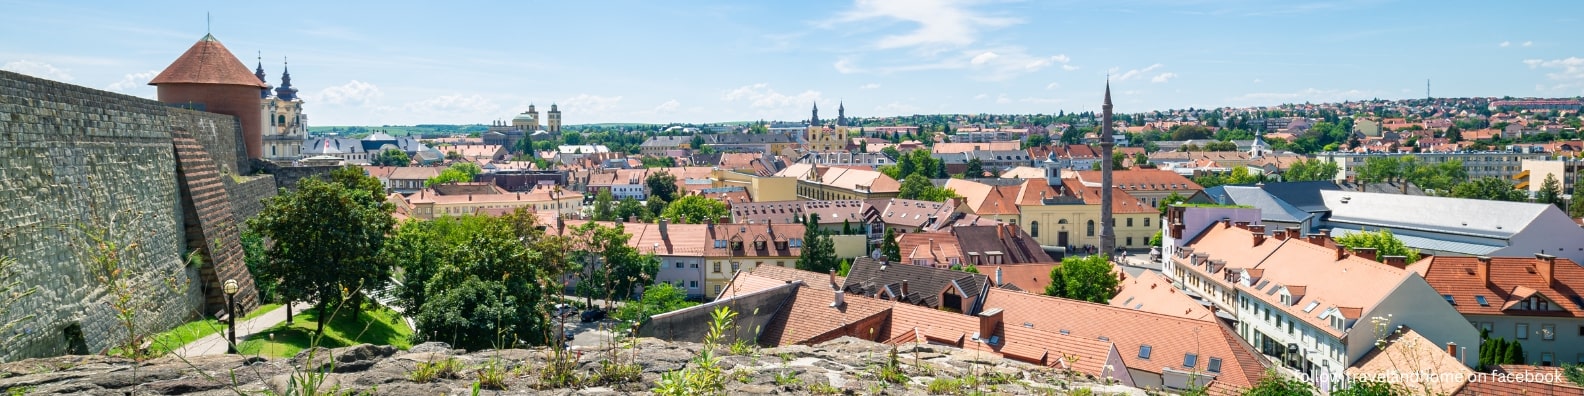 Eger panoramic view over the town from the castle walls, Hungary, sightseeing, day trips from Budapest min